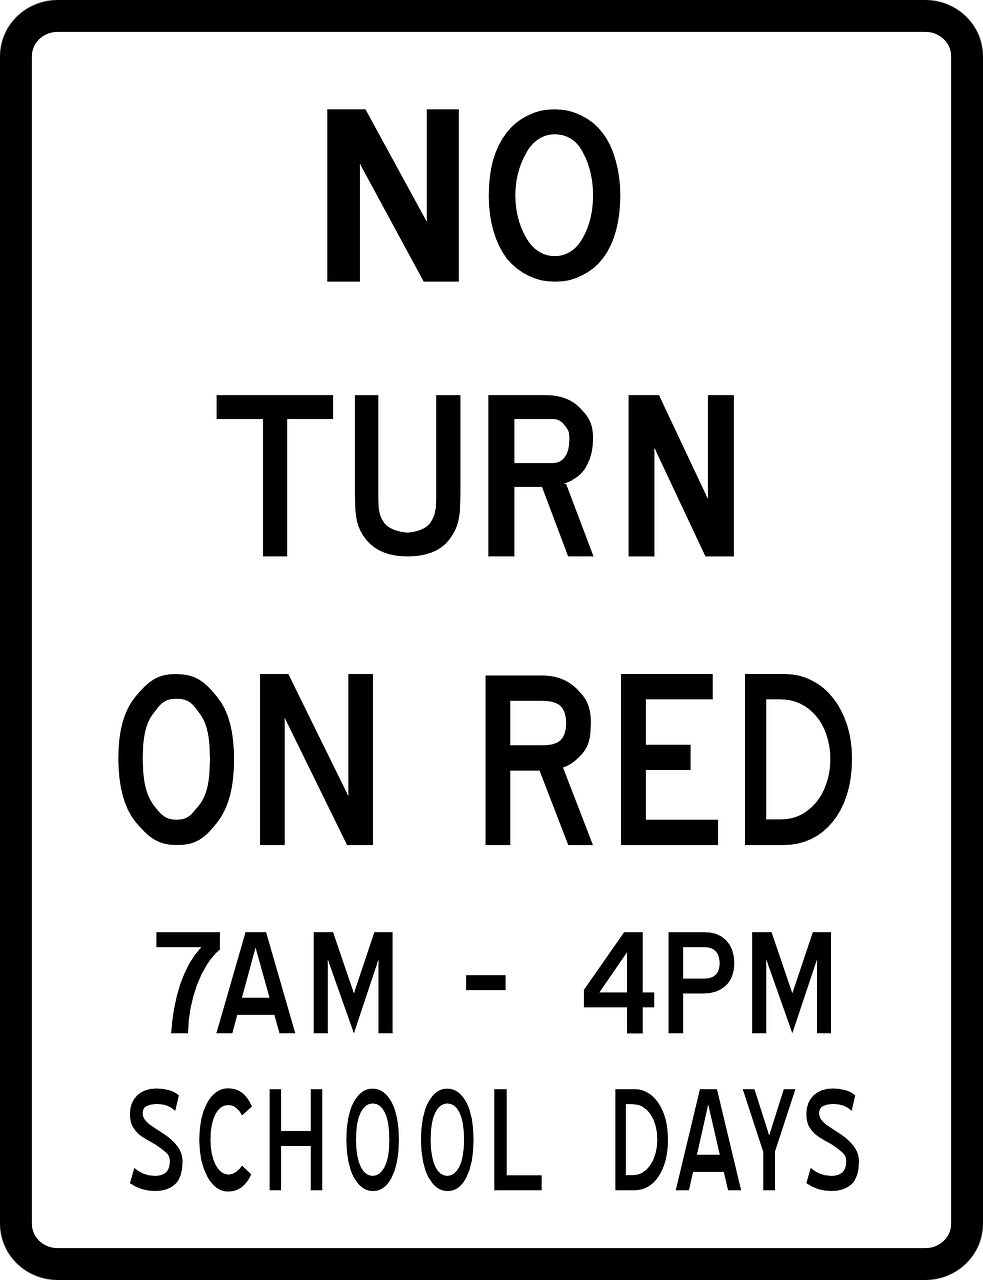 no turn on red road sign icon free photo